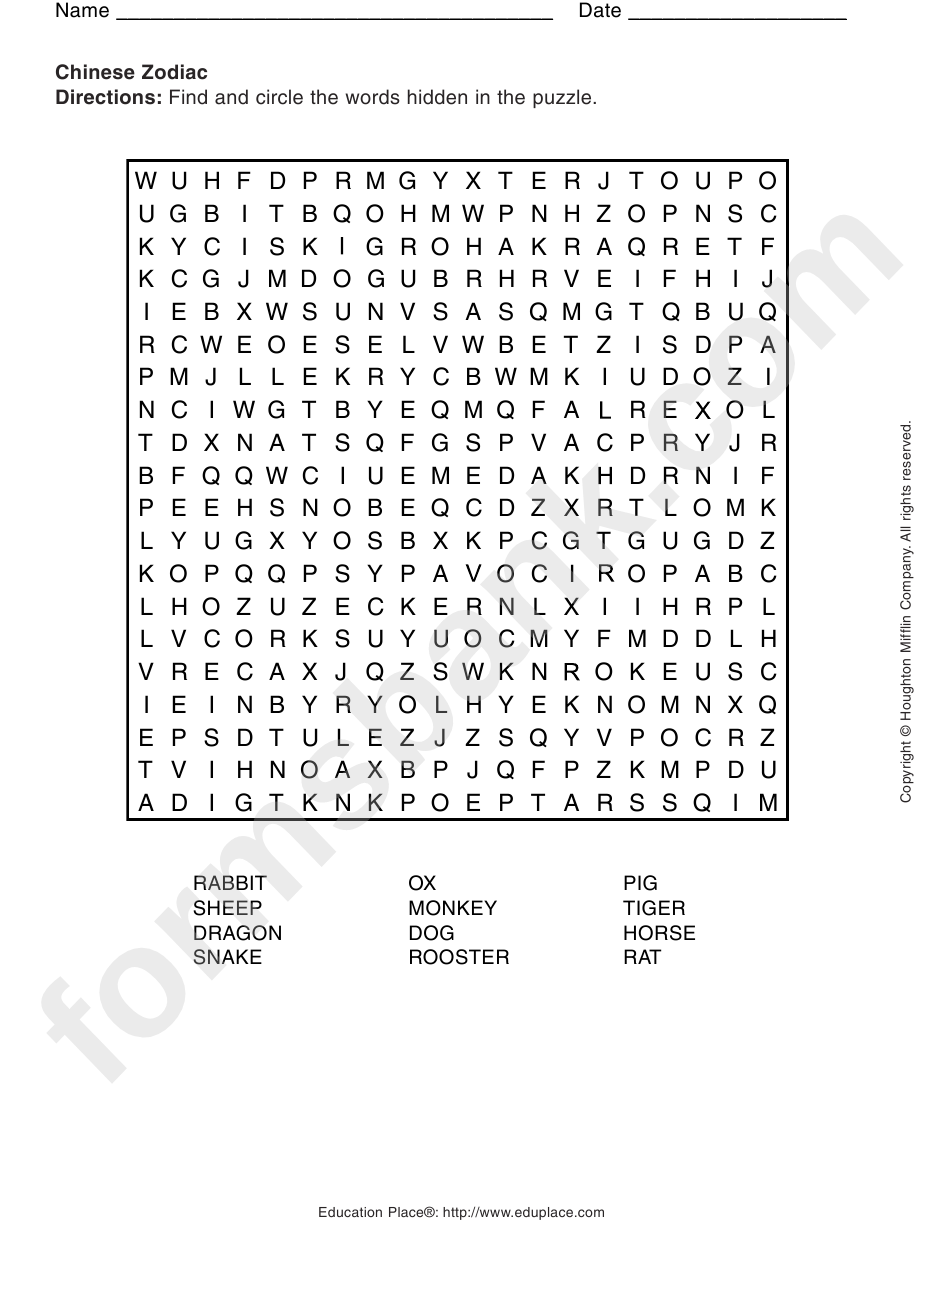 Word Search Worksheet - Chinese Zodiac